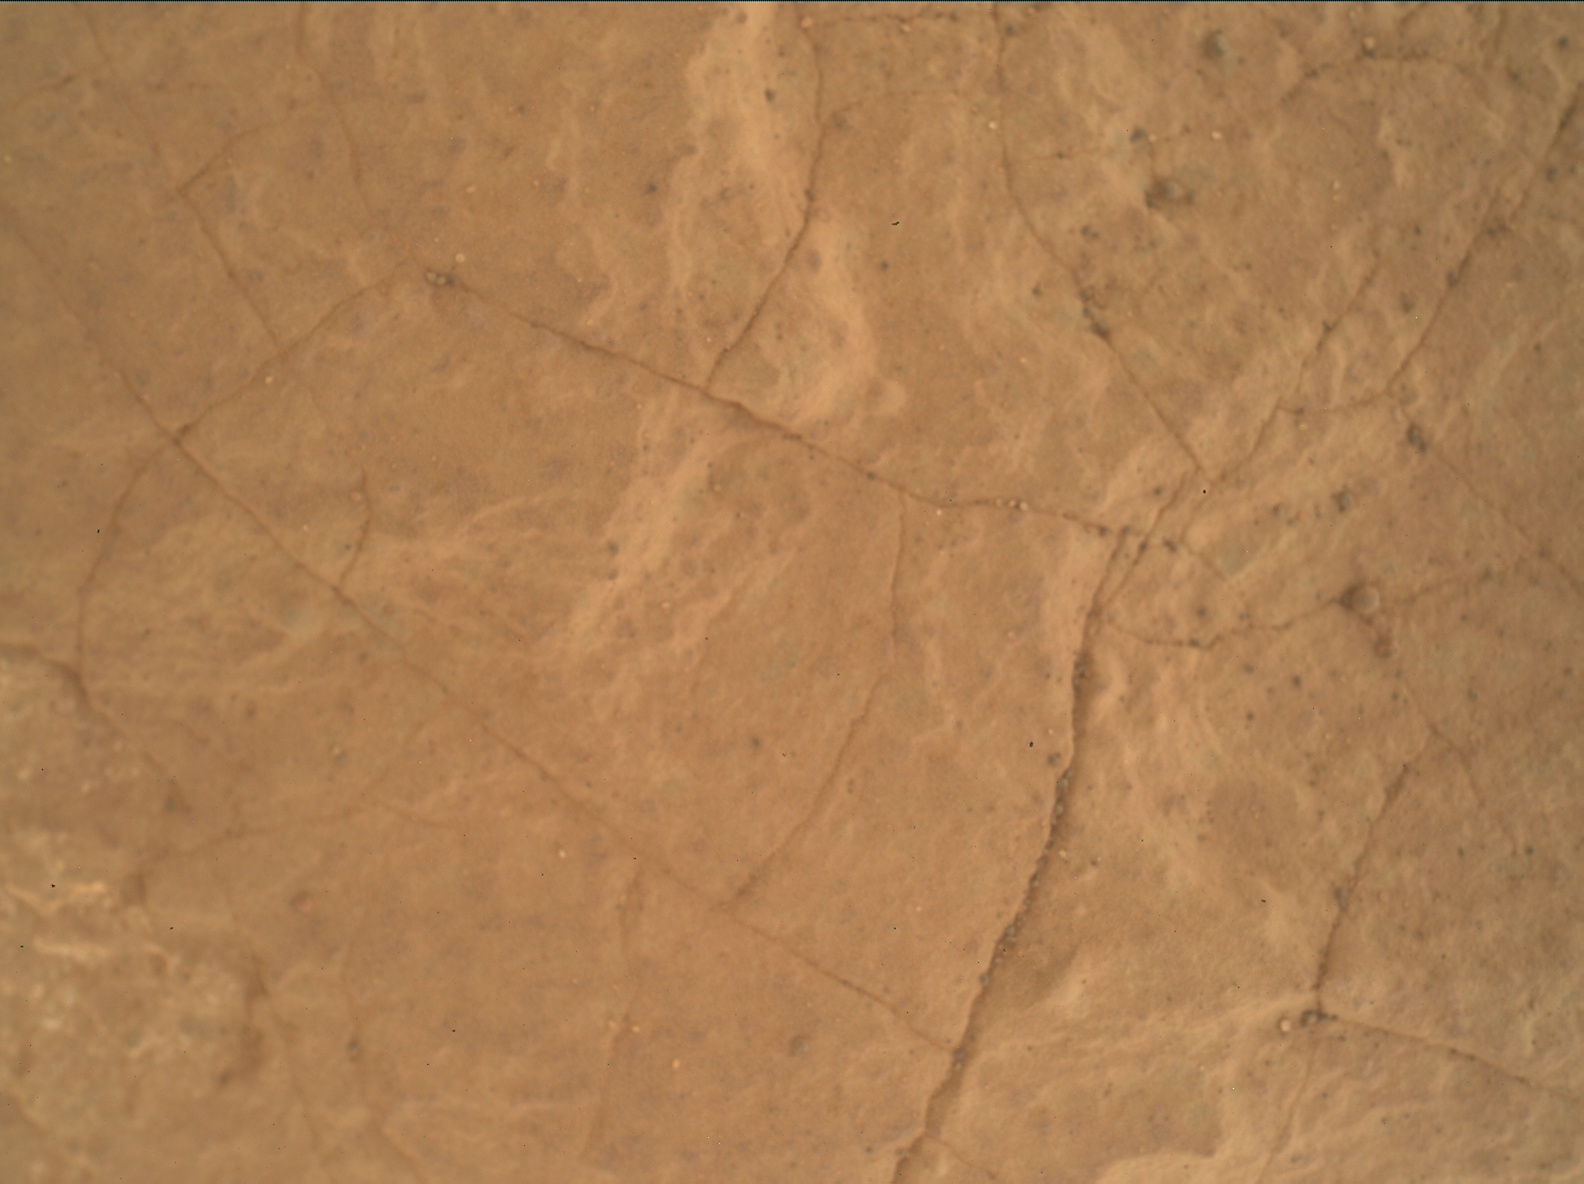 Nasa's Mars rover Curiosity acquired this image using its Mars Hand Lens Imager (MAHLI) on Sol 3026